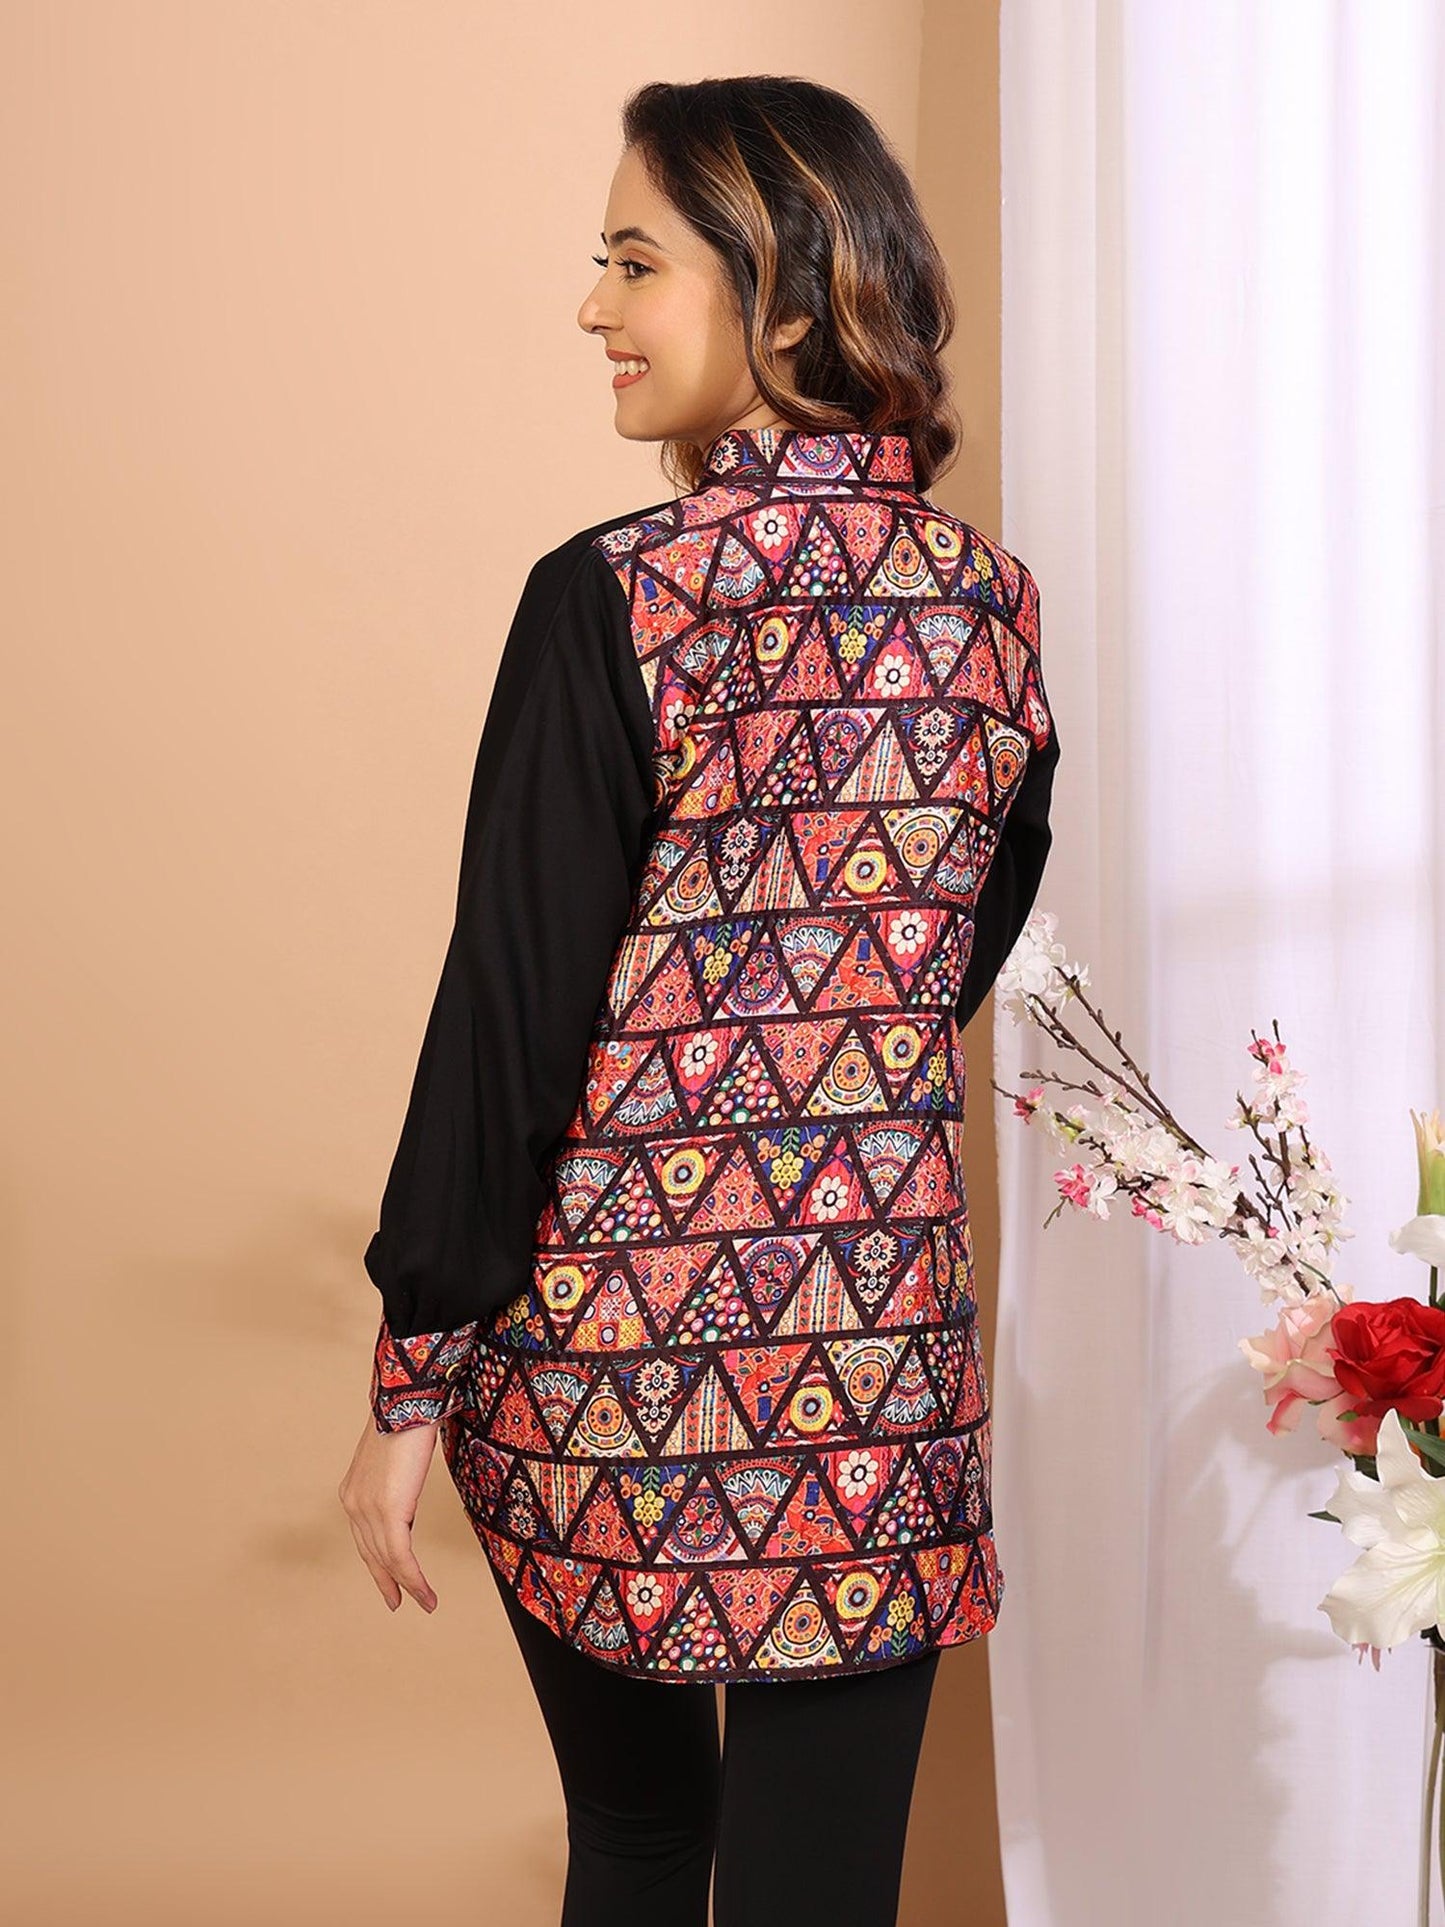 Chromatic Prism Accents Shirt - Amore